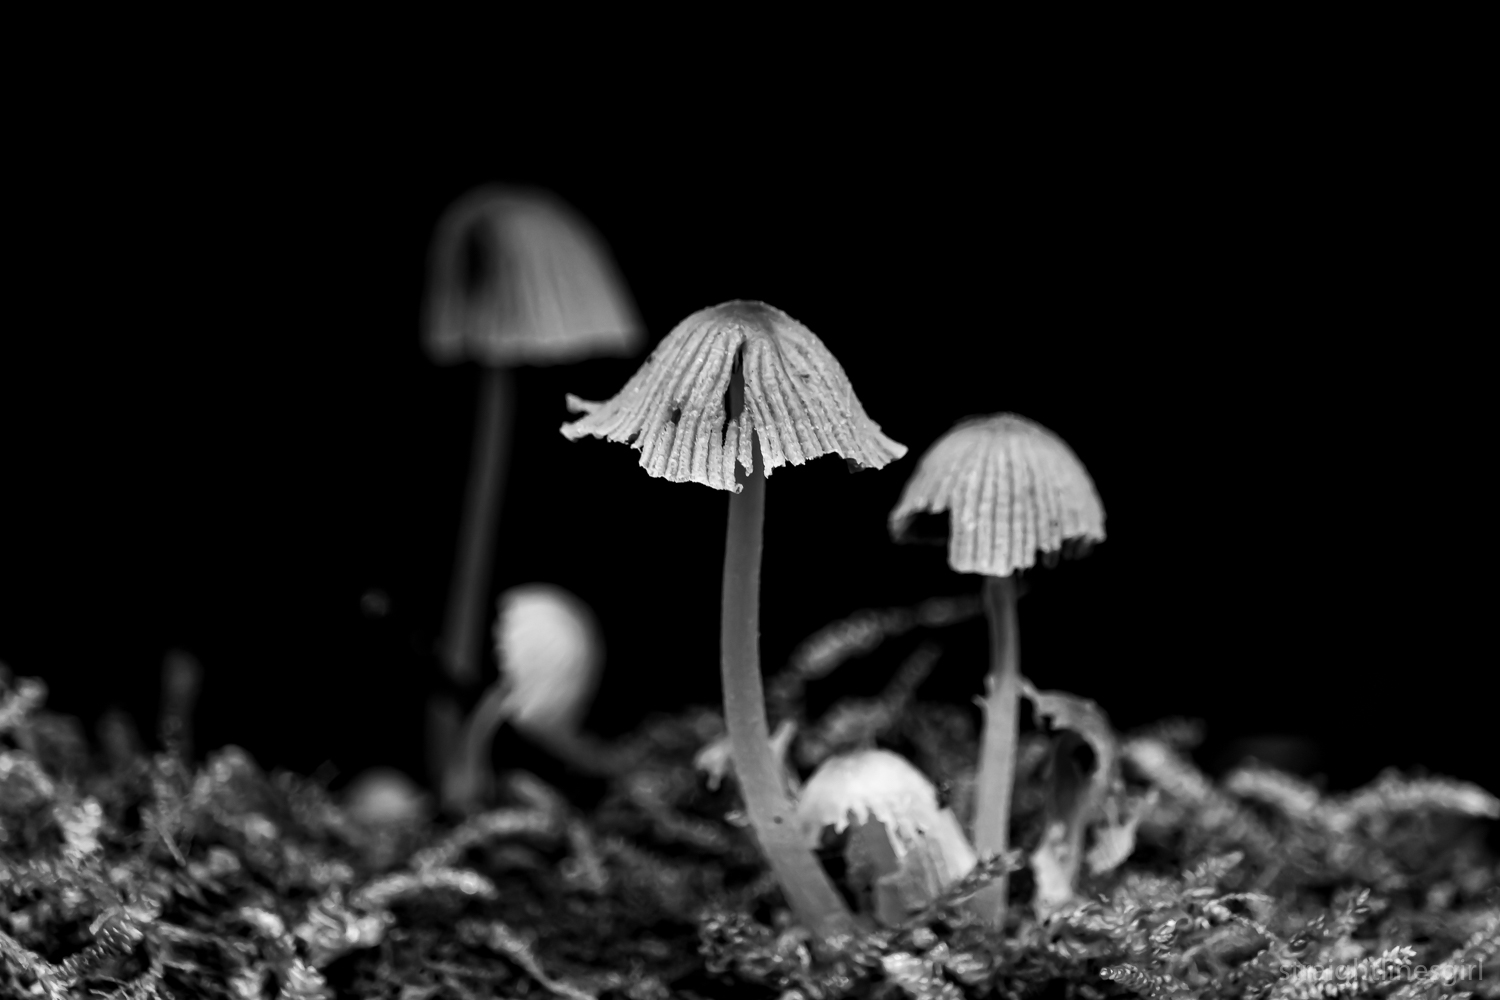 A black and white image of three small funghi